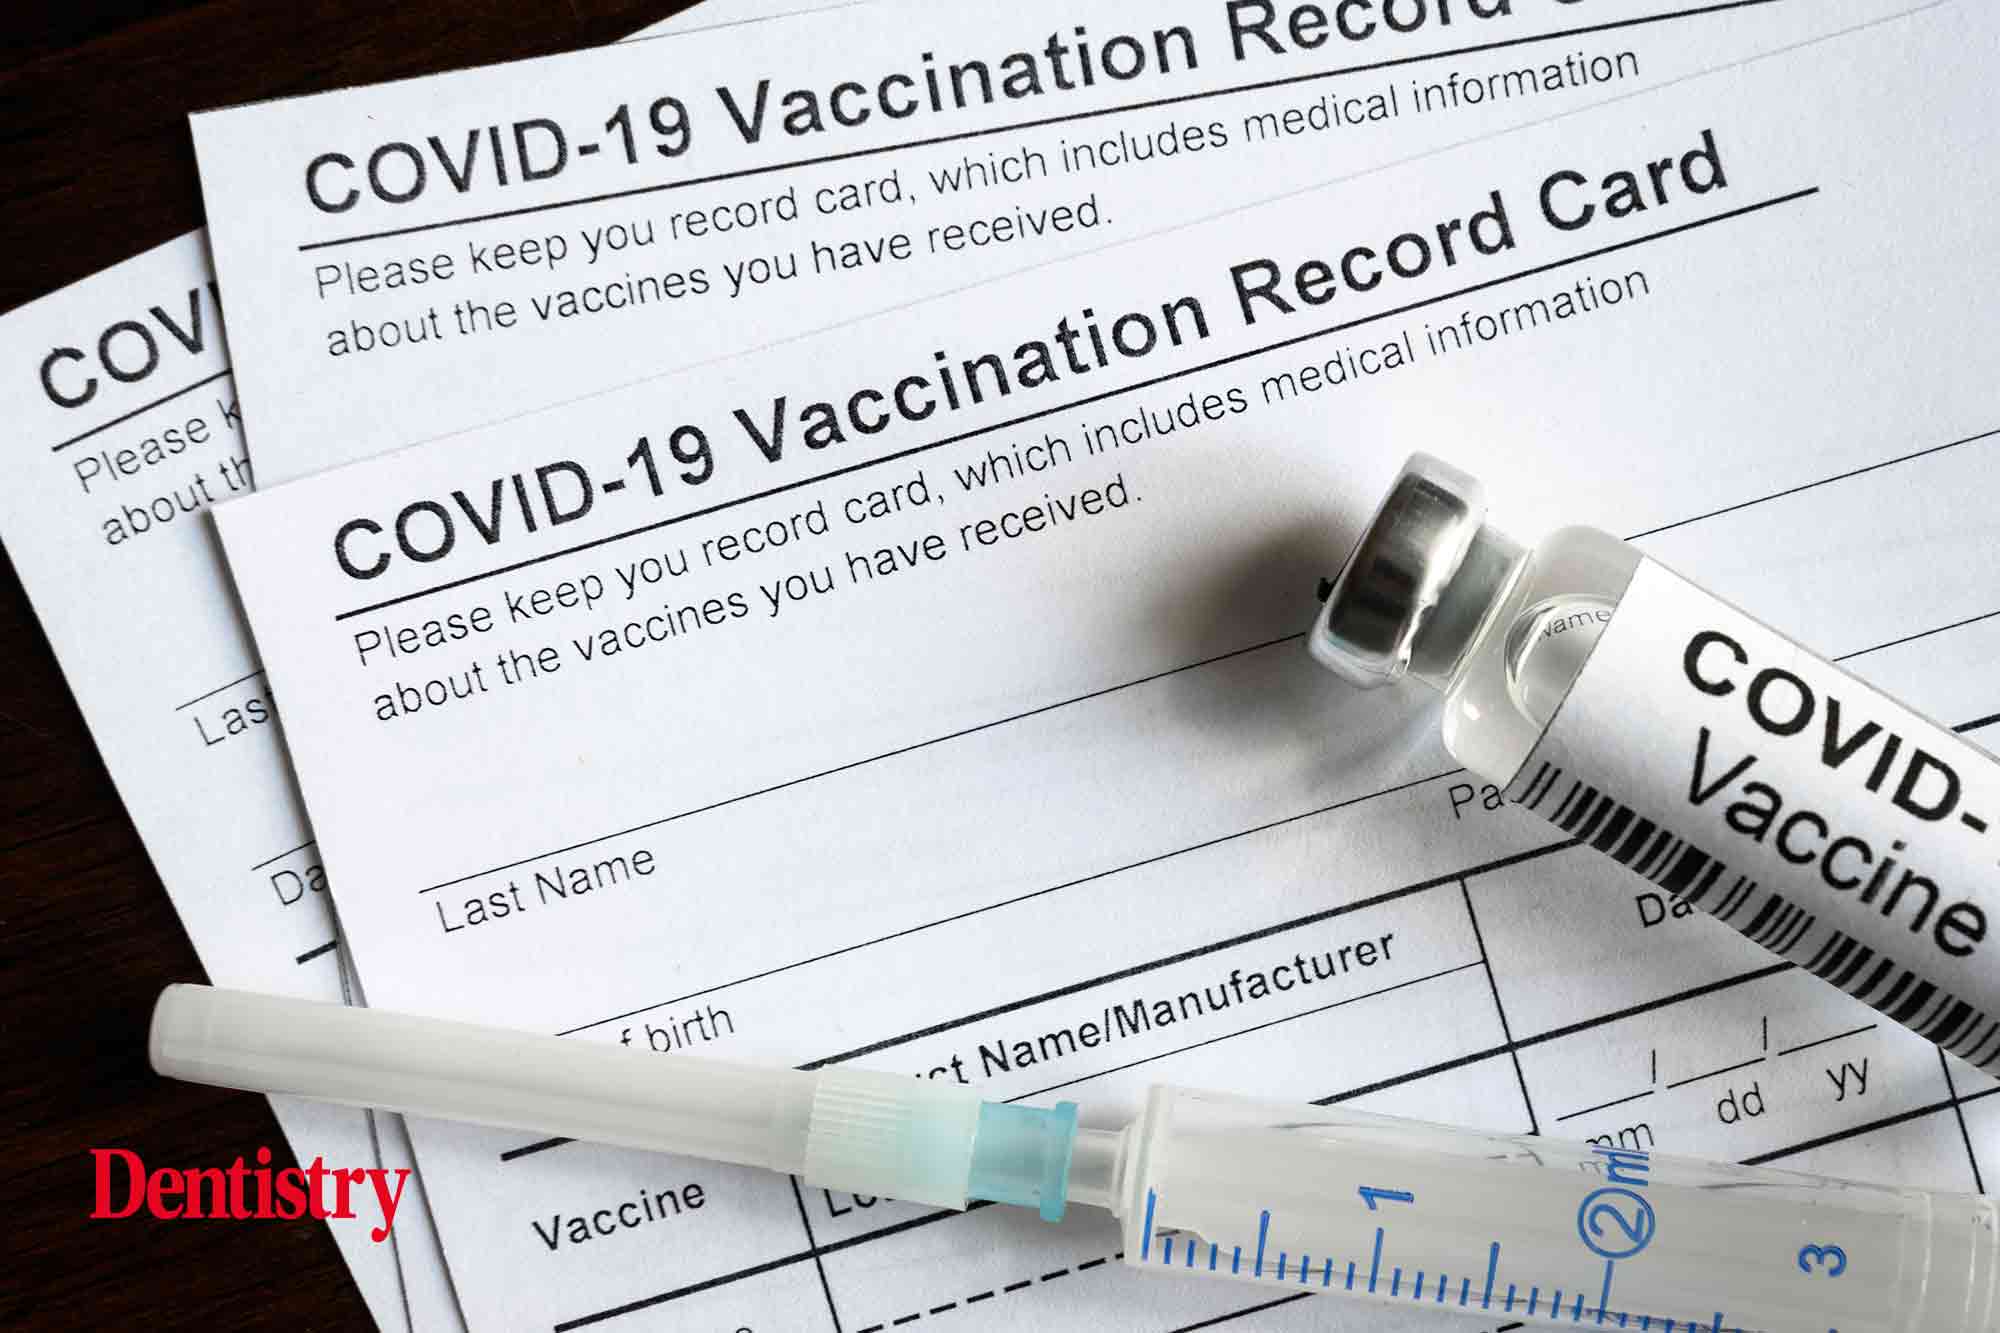 Dentists among NHS staff rallying against Covid-19 vaccine mandate